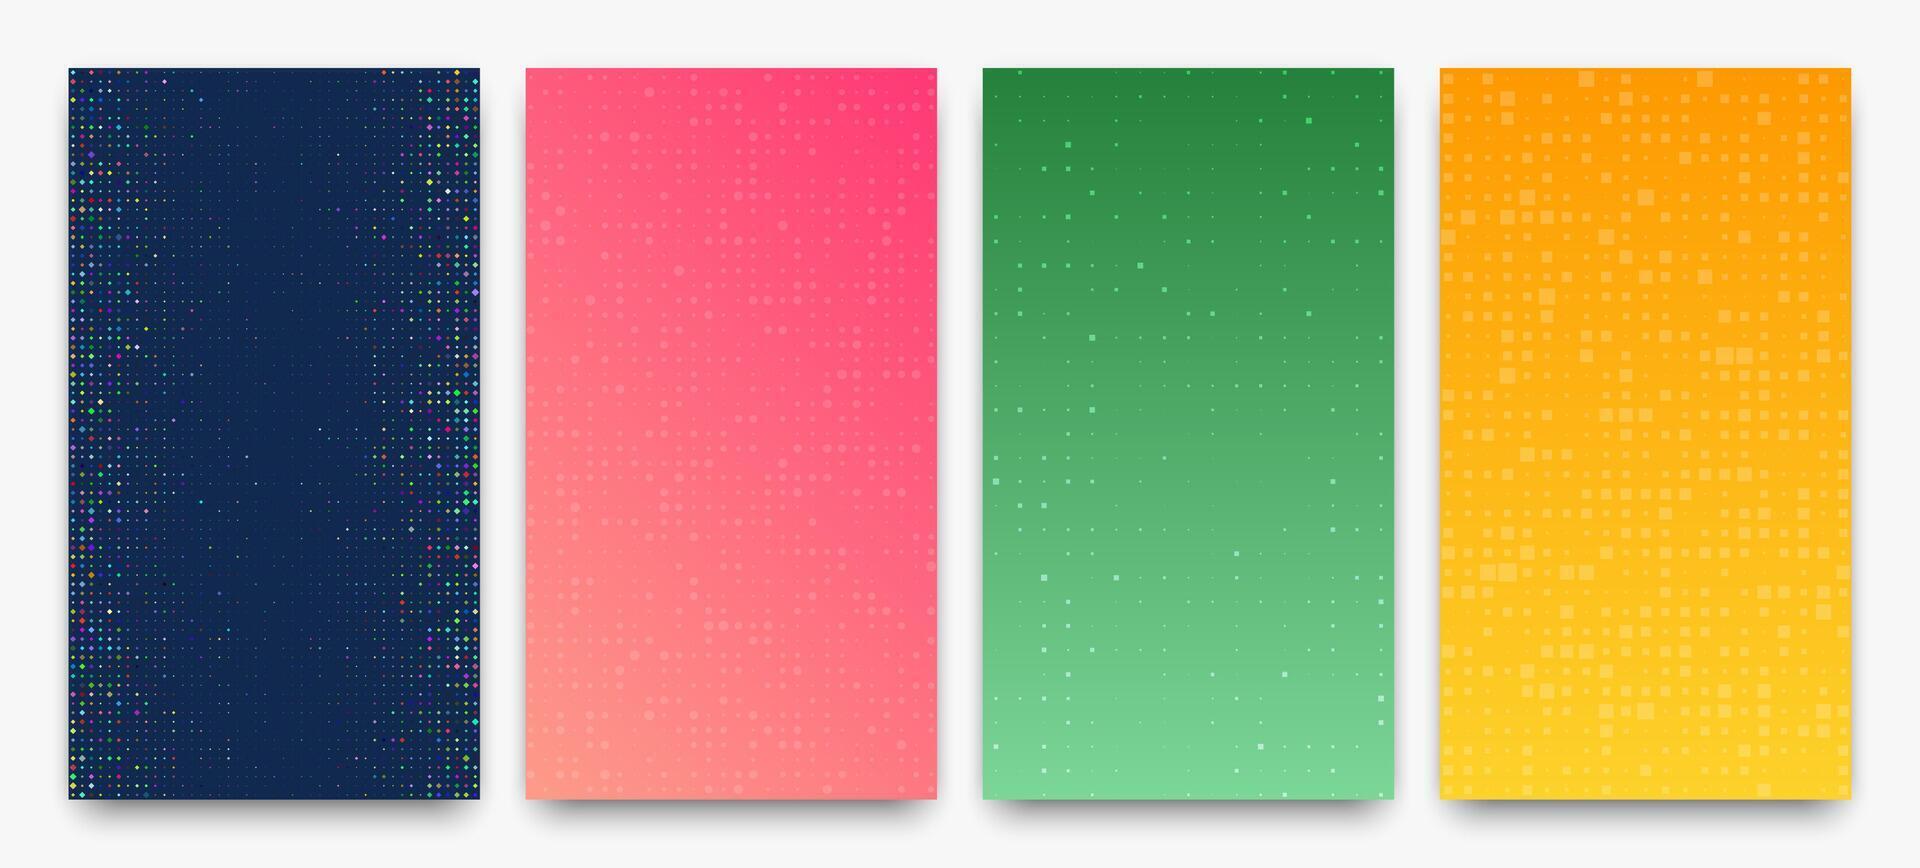 Abstract gradient geometric background of squares vector